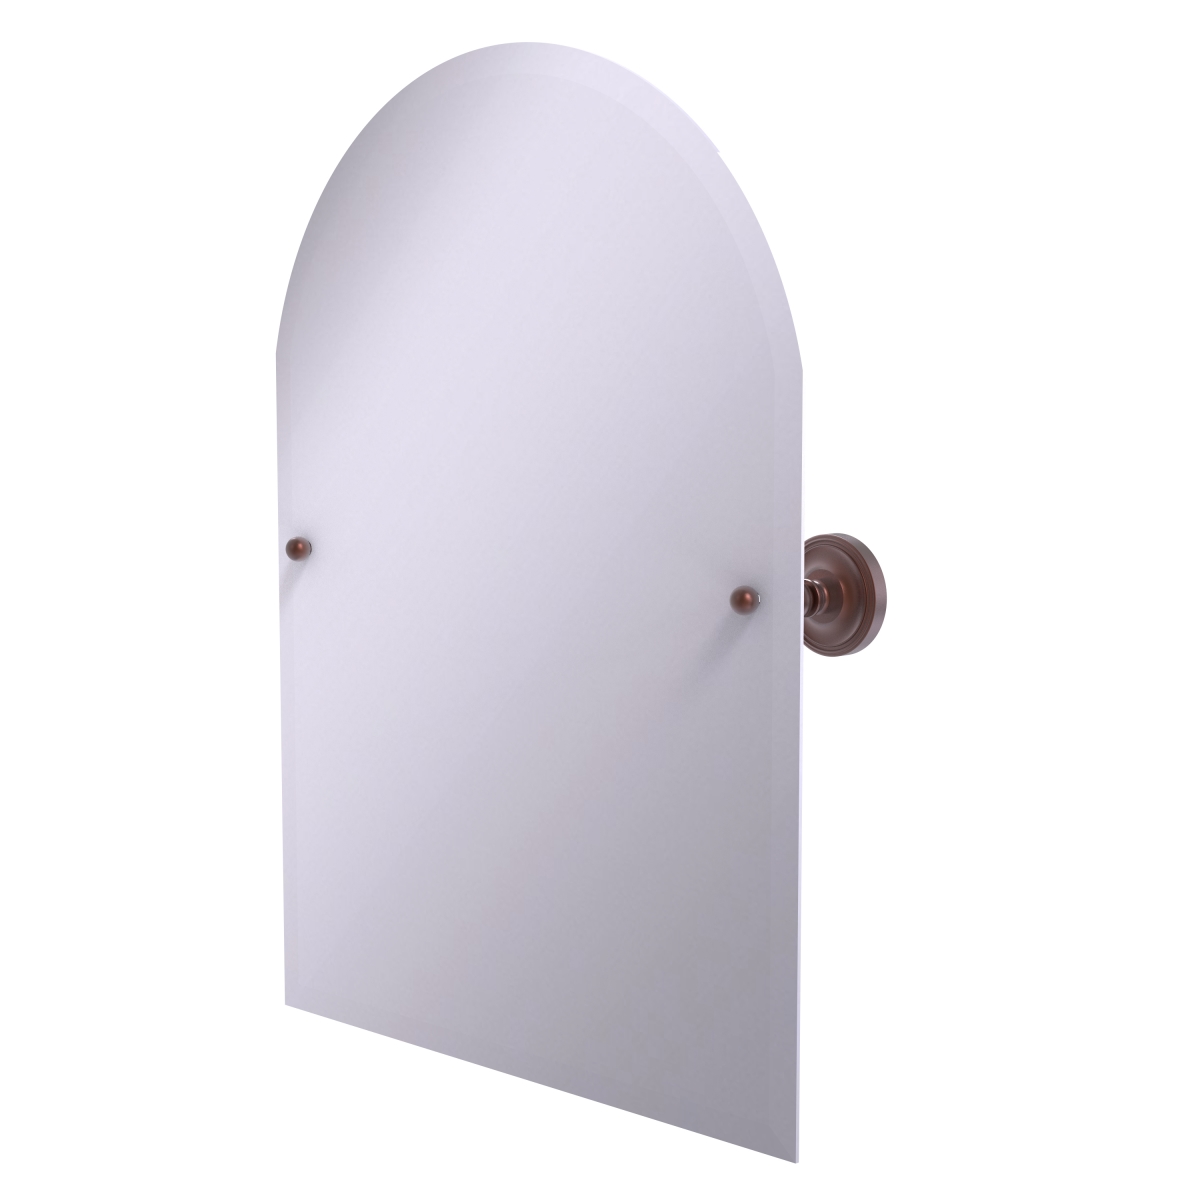 Allied Brass PR-94-CA Frameless Arched Top Tilt Mirror with Beveled Edge, Antique Copper - 28 x 21 x 29 in.